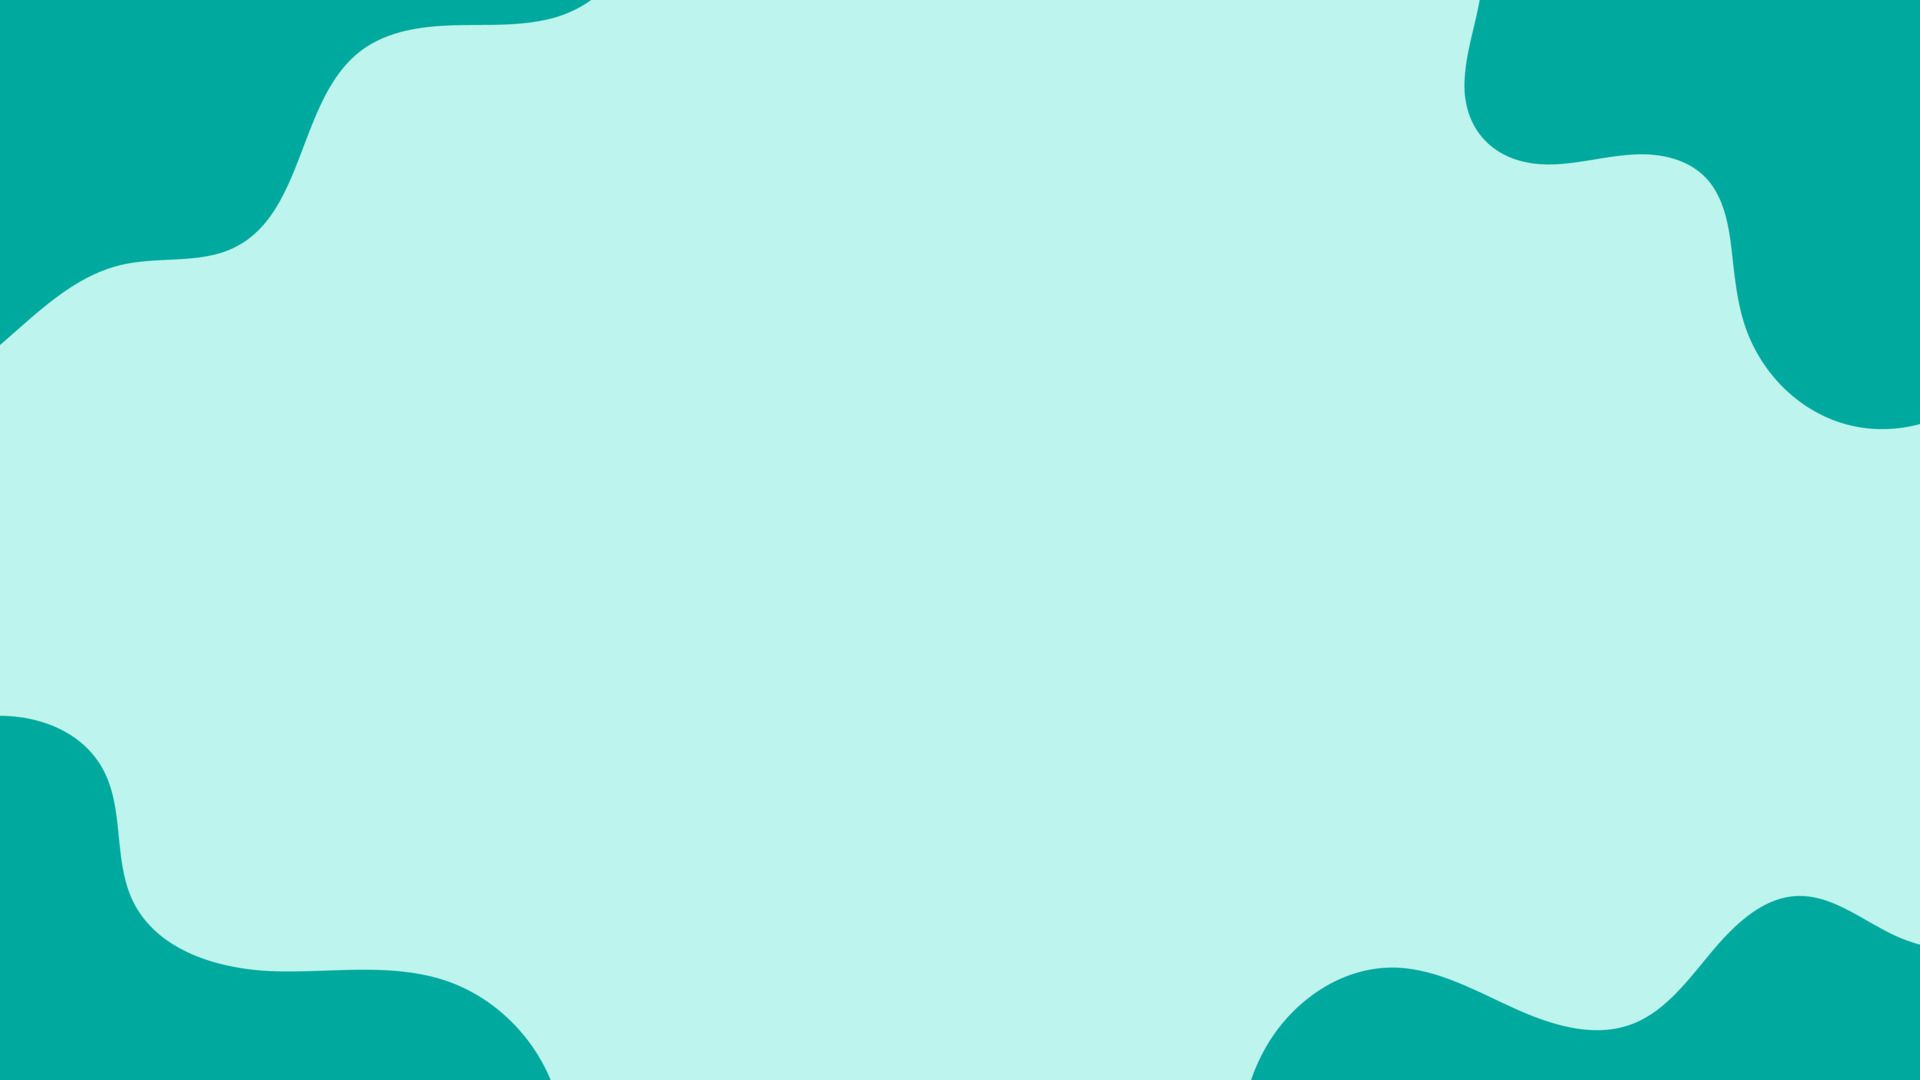 A light blue background with two green-blue wavy shapes on the edges. - Teal